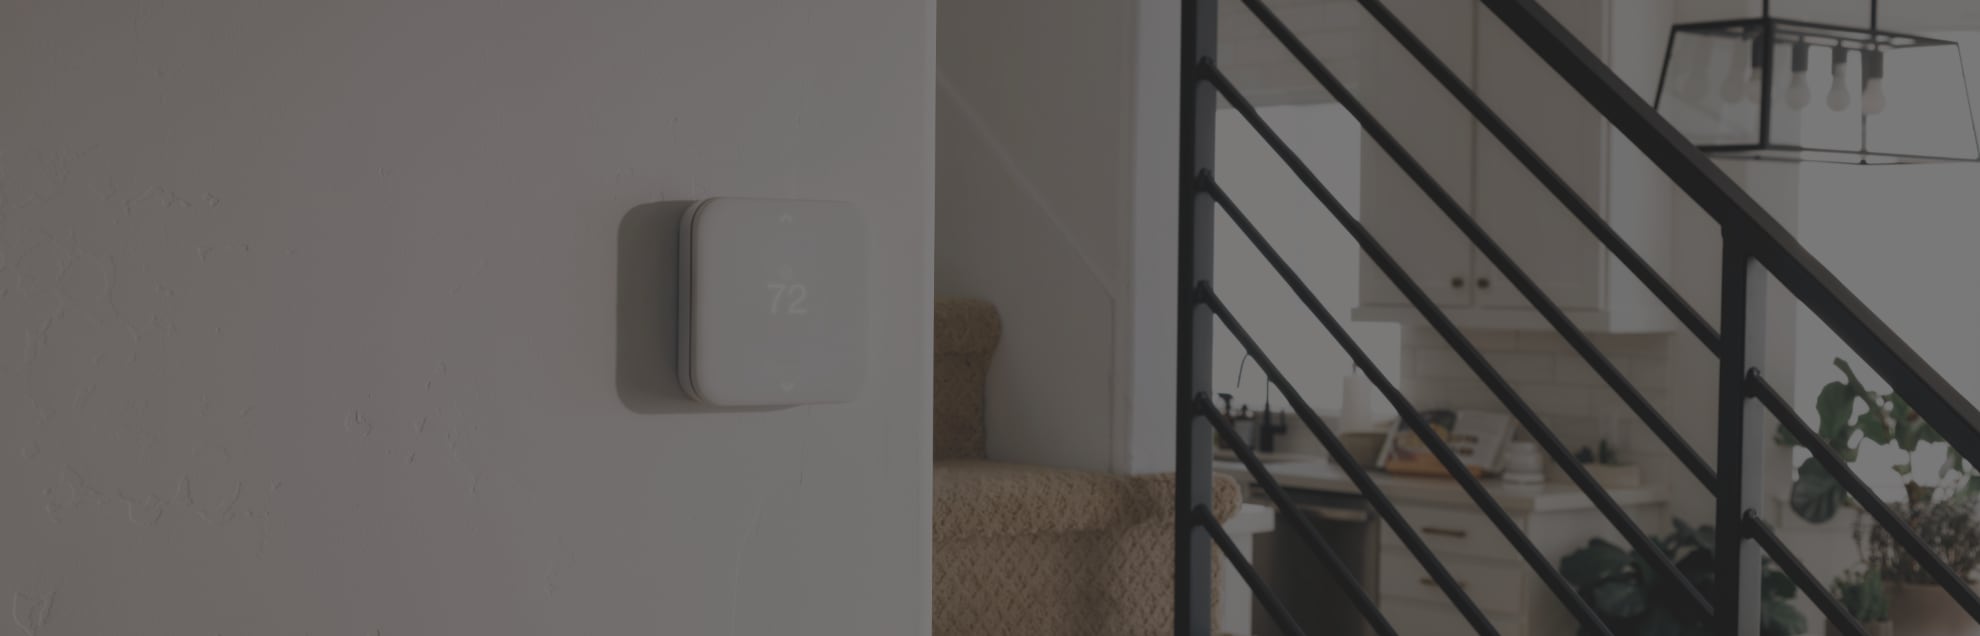 Lawrence Smart Thermostat